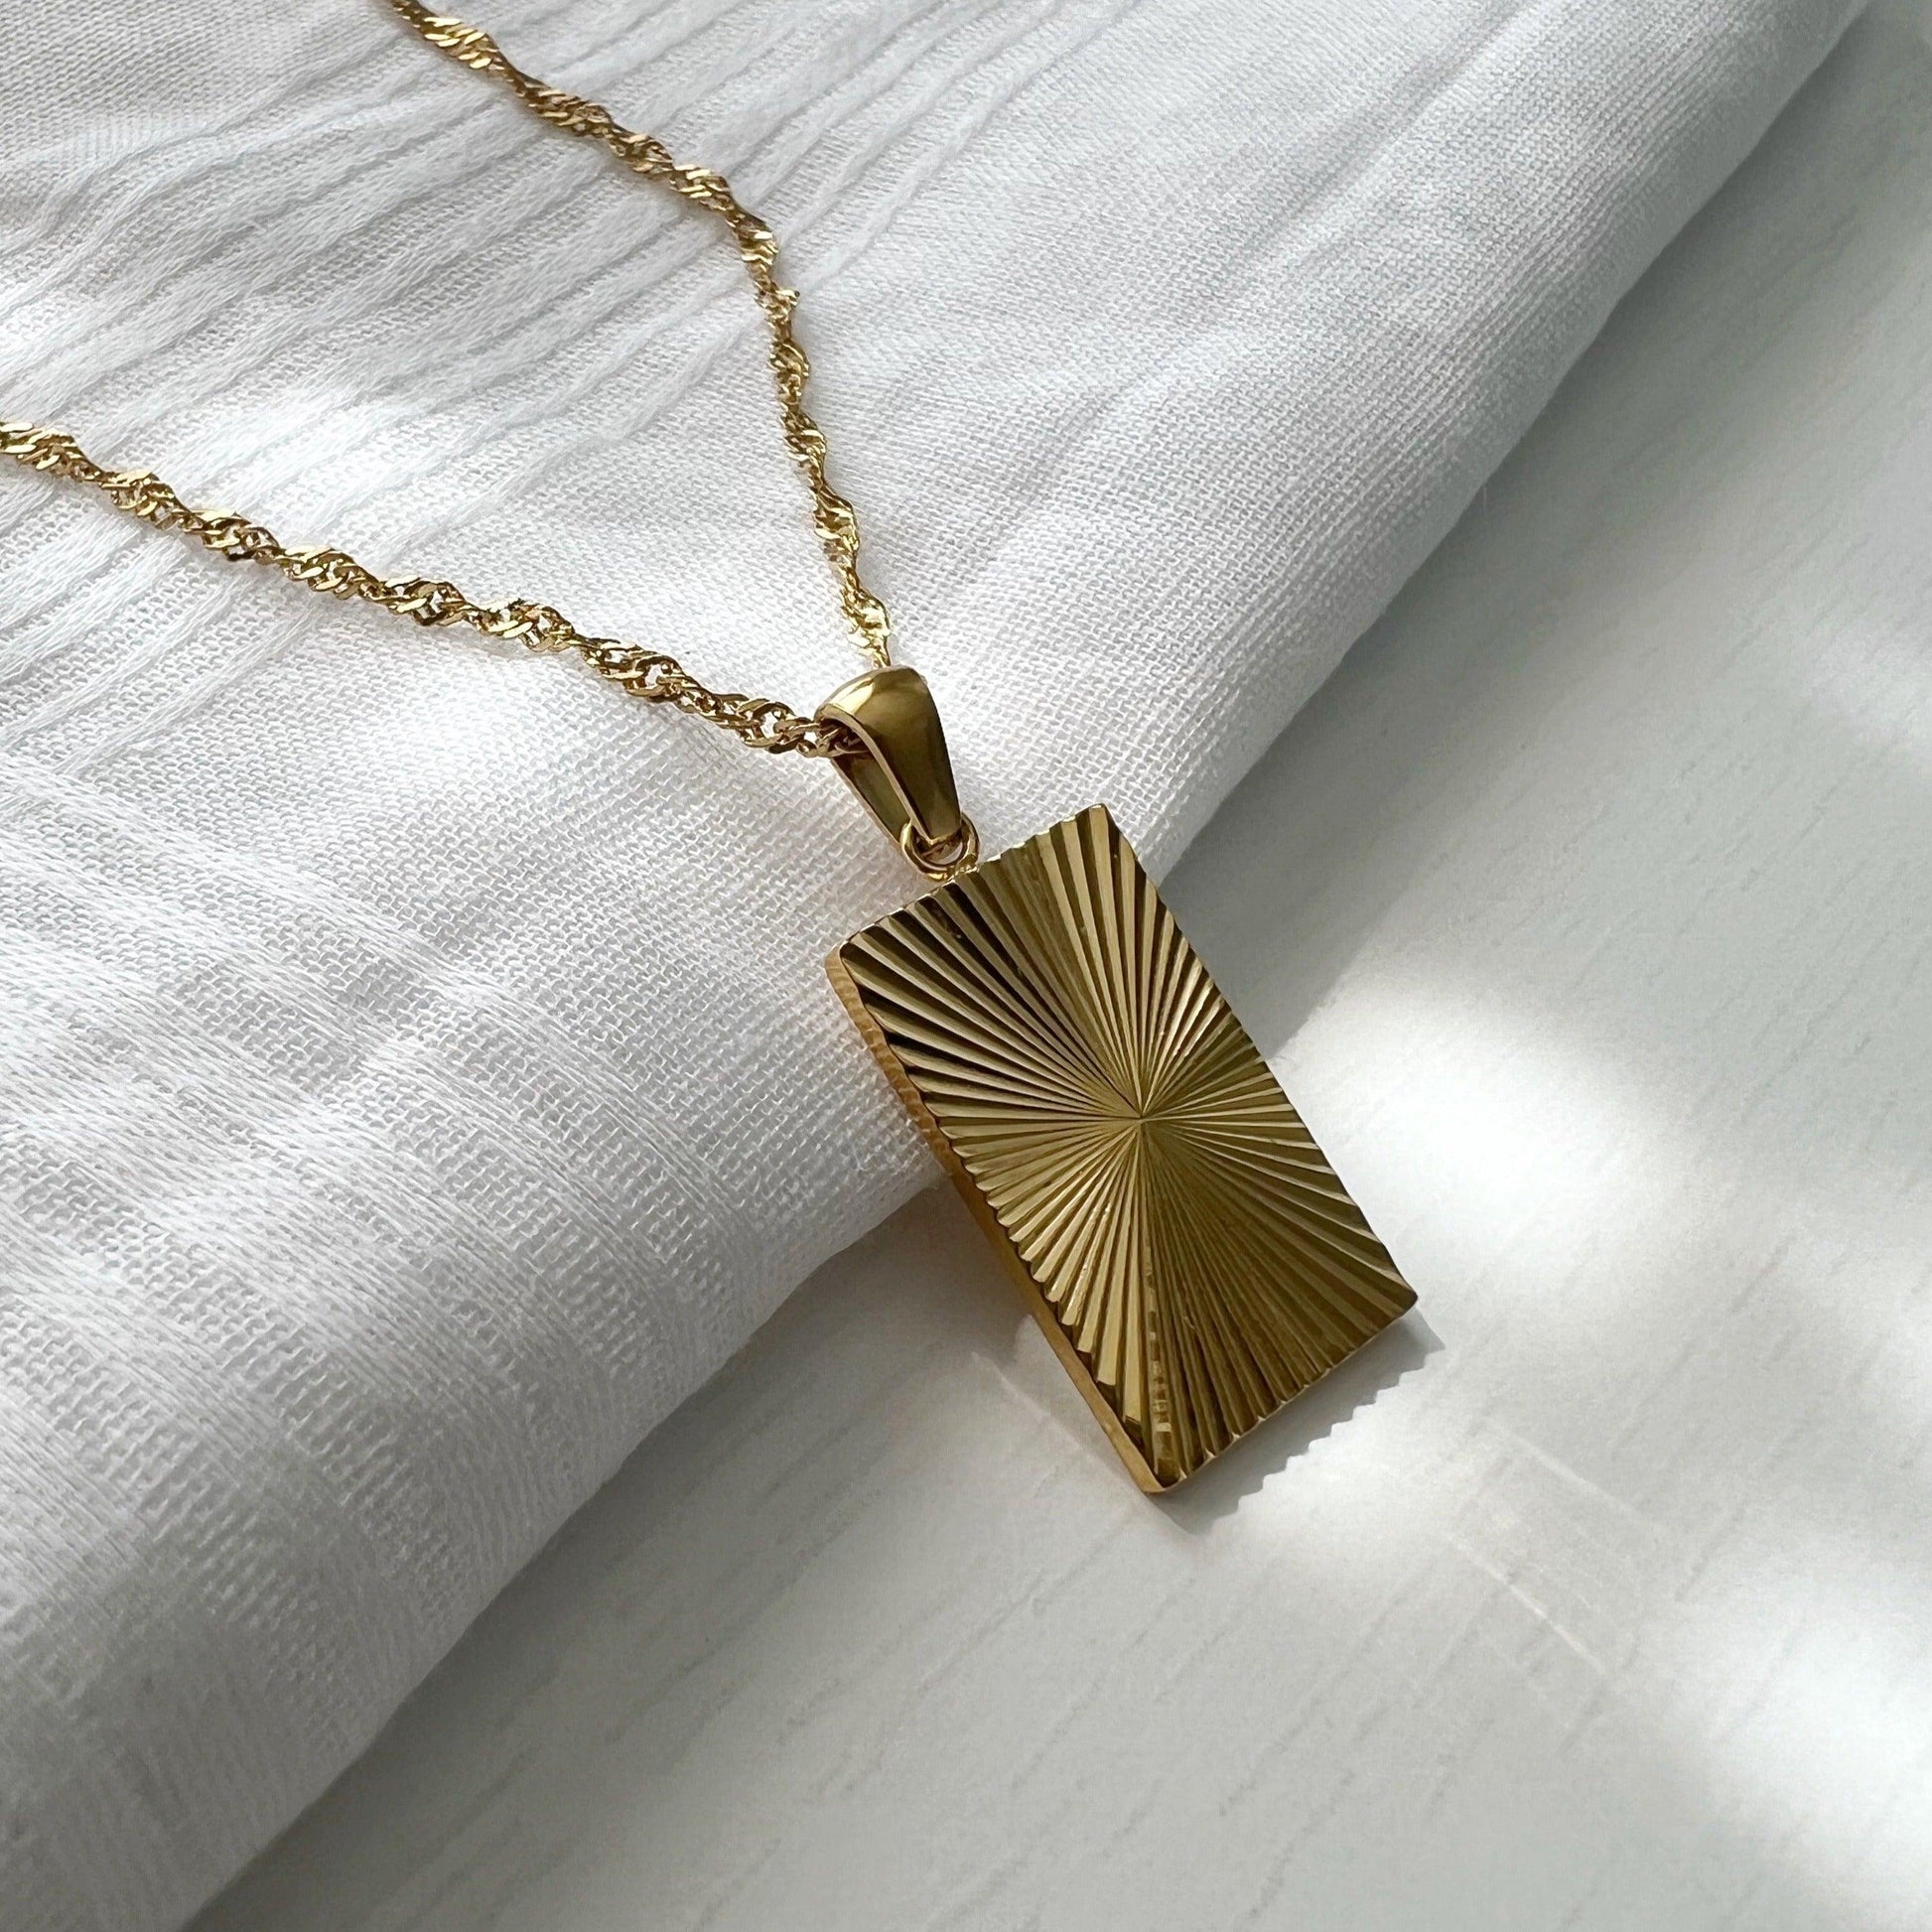 Celeste Necklace | Pendant Necklace - JESSA JEWELRY | GOLD JEWELRY; dainty, affordable gold everyday jewelry. Tarnish free, water-resistant, hypoallergenic. Jewelry for everyday wear